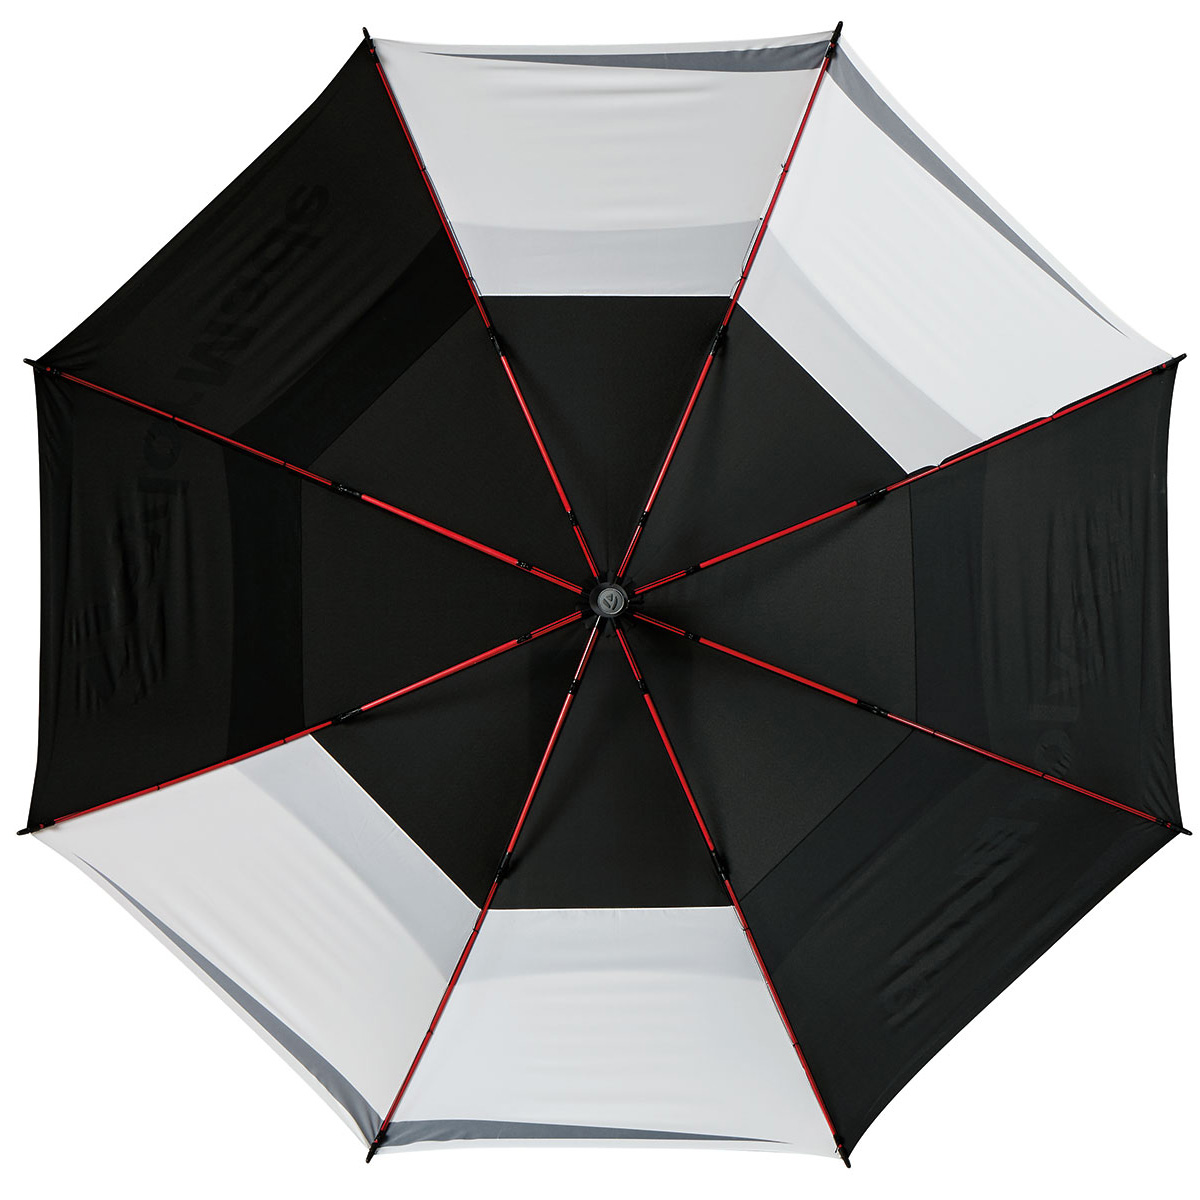 taylormade tour double canopy 64 umbrella